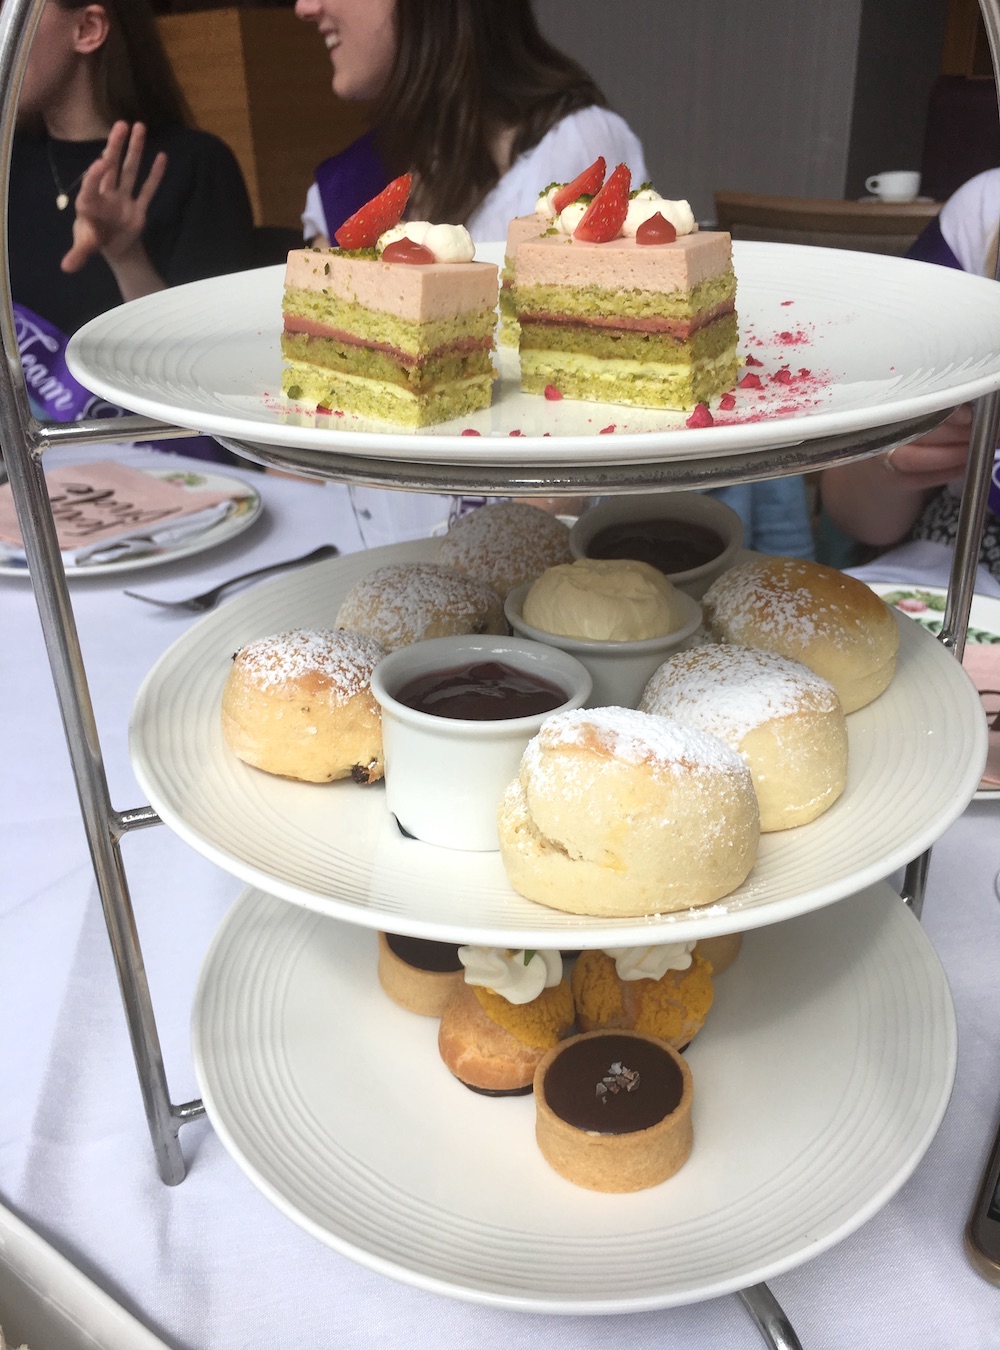 The mere knutsford afternoon tea may 2019